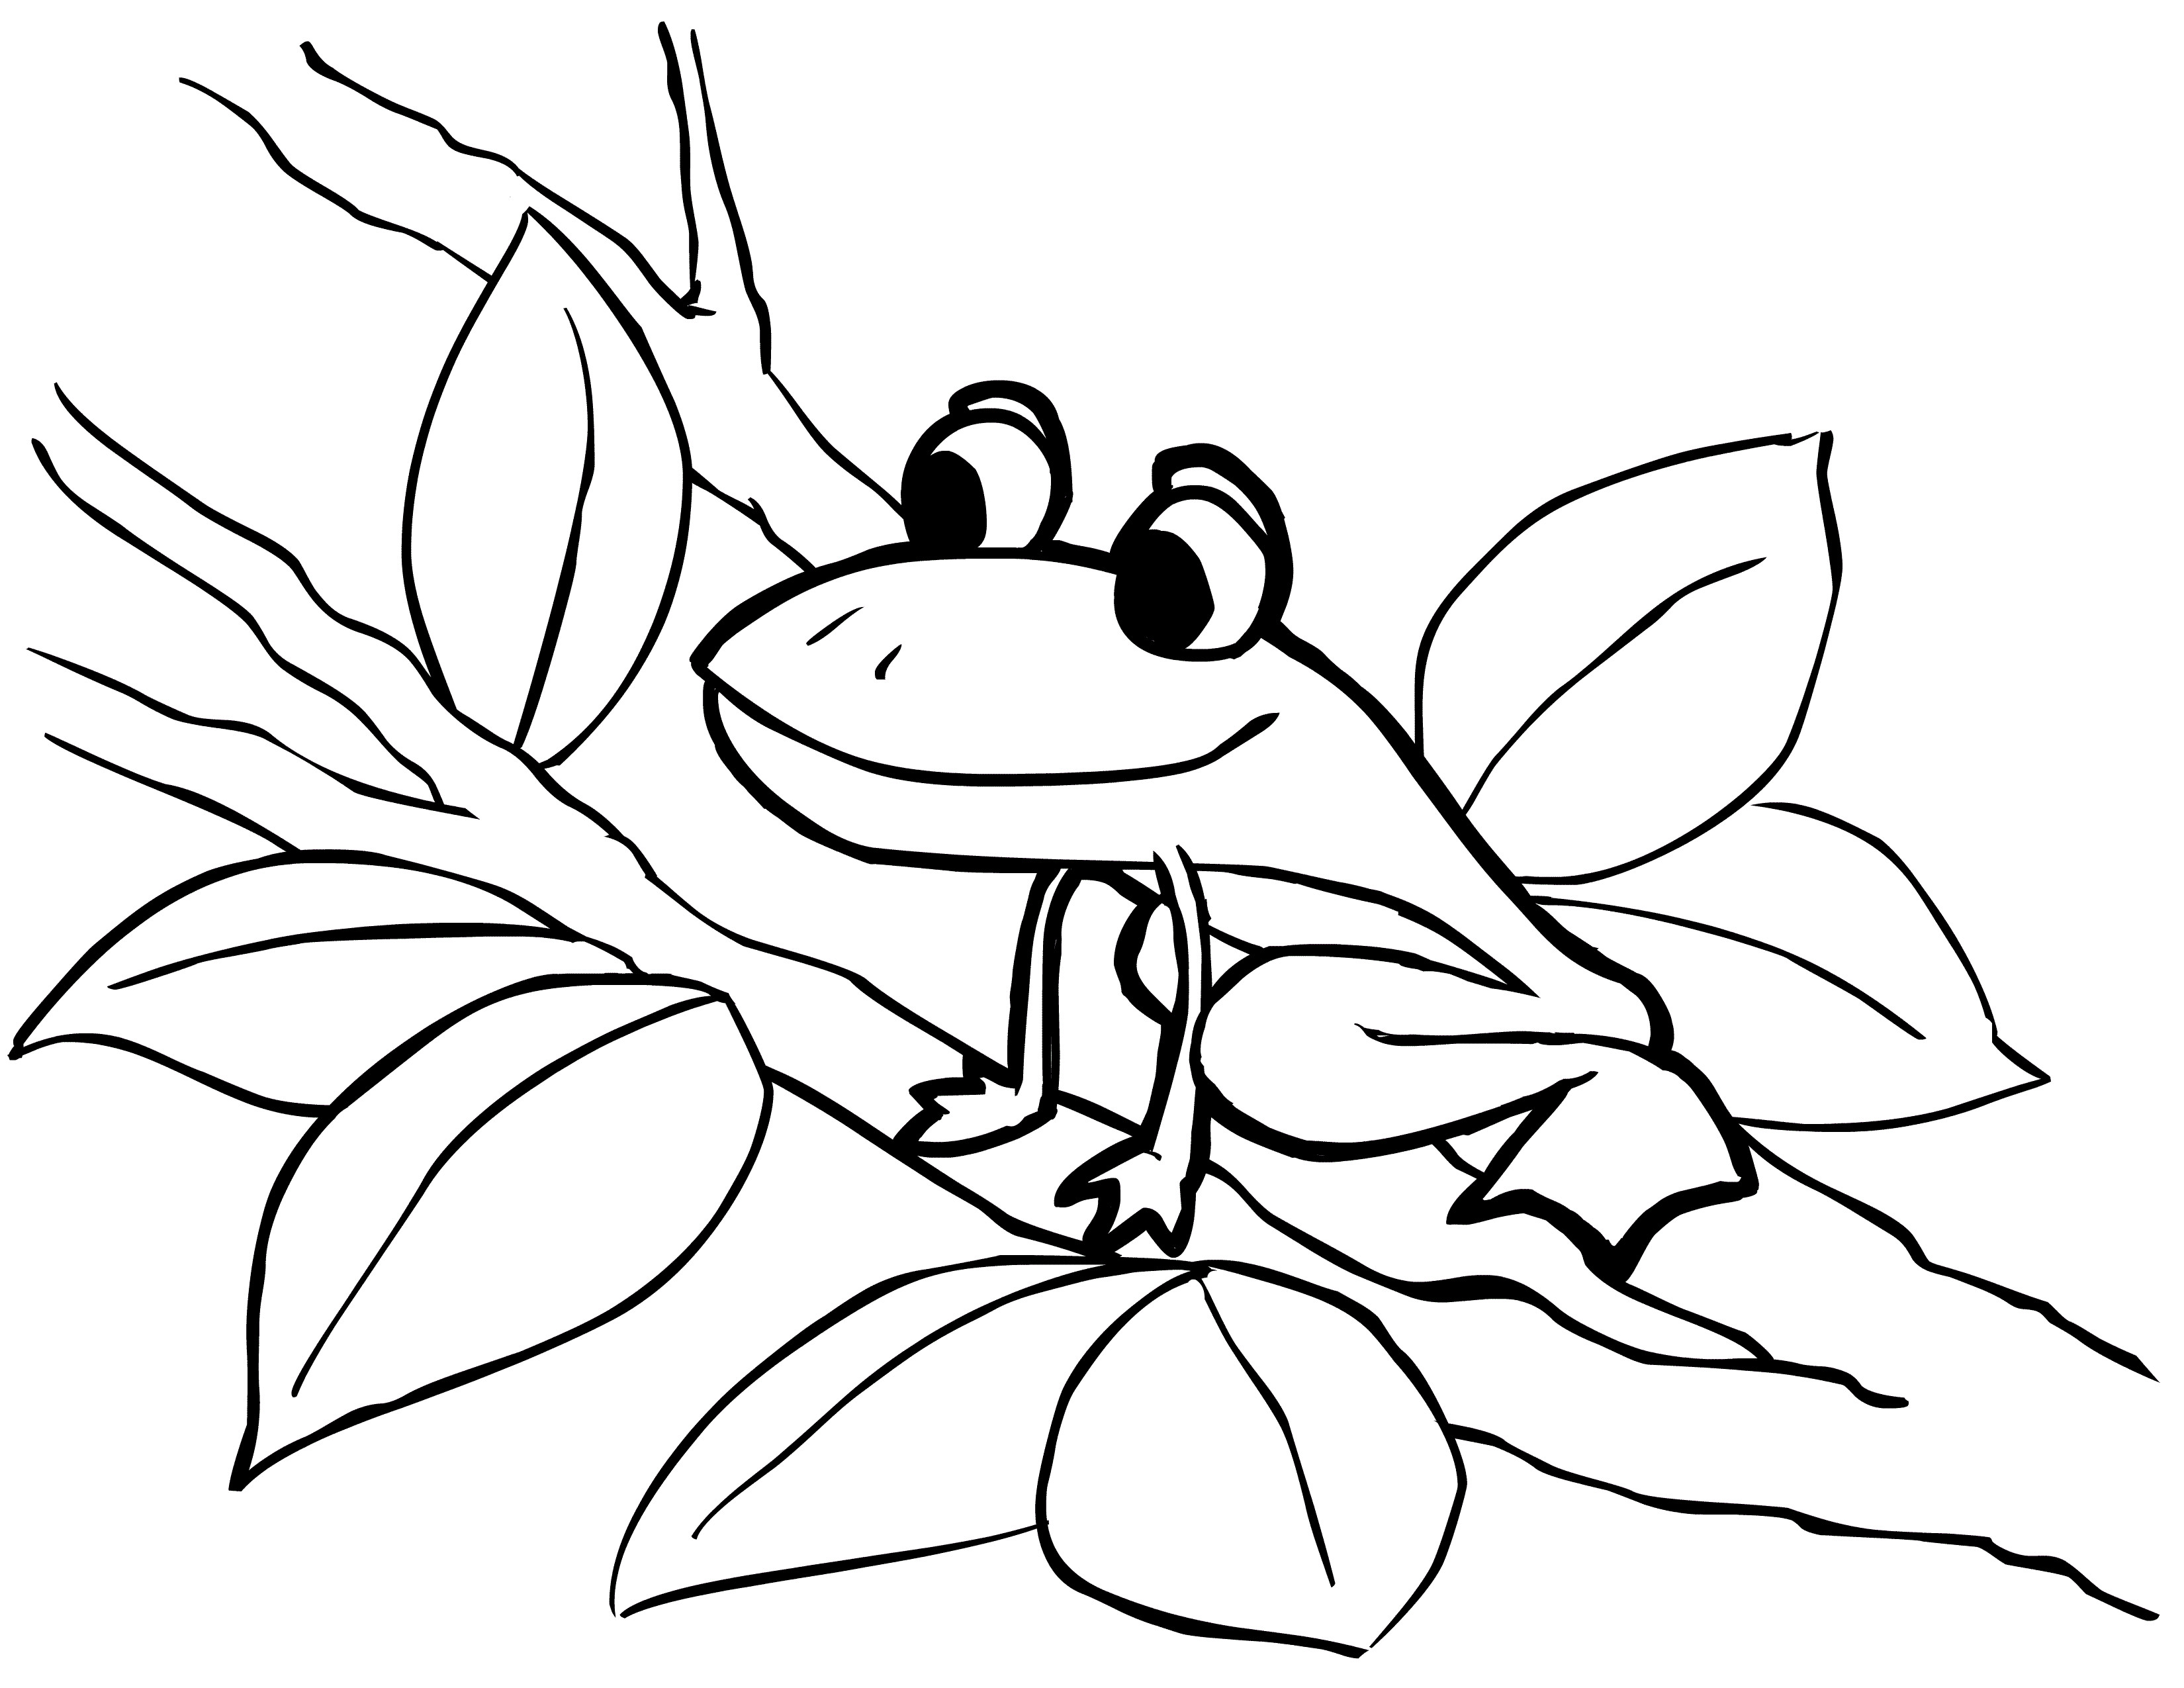 Frog Coloring Sheet
 Free Printable Frog Coloring Pages For Kids